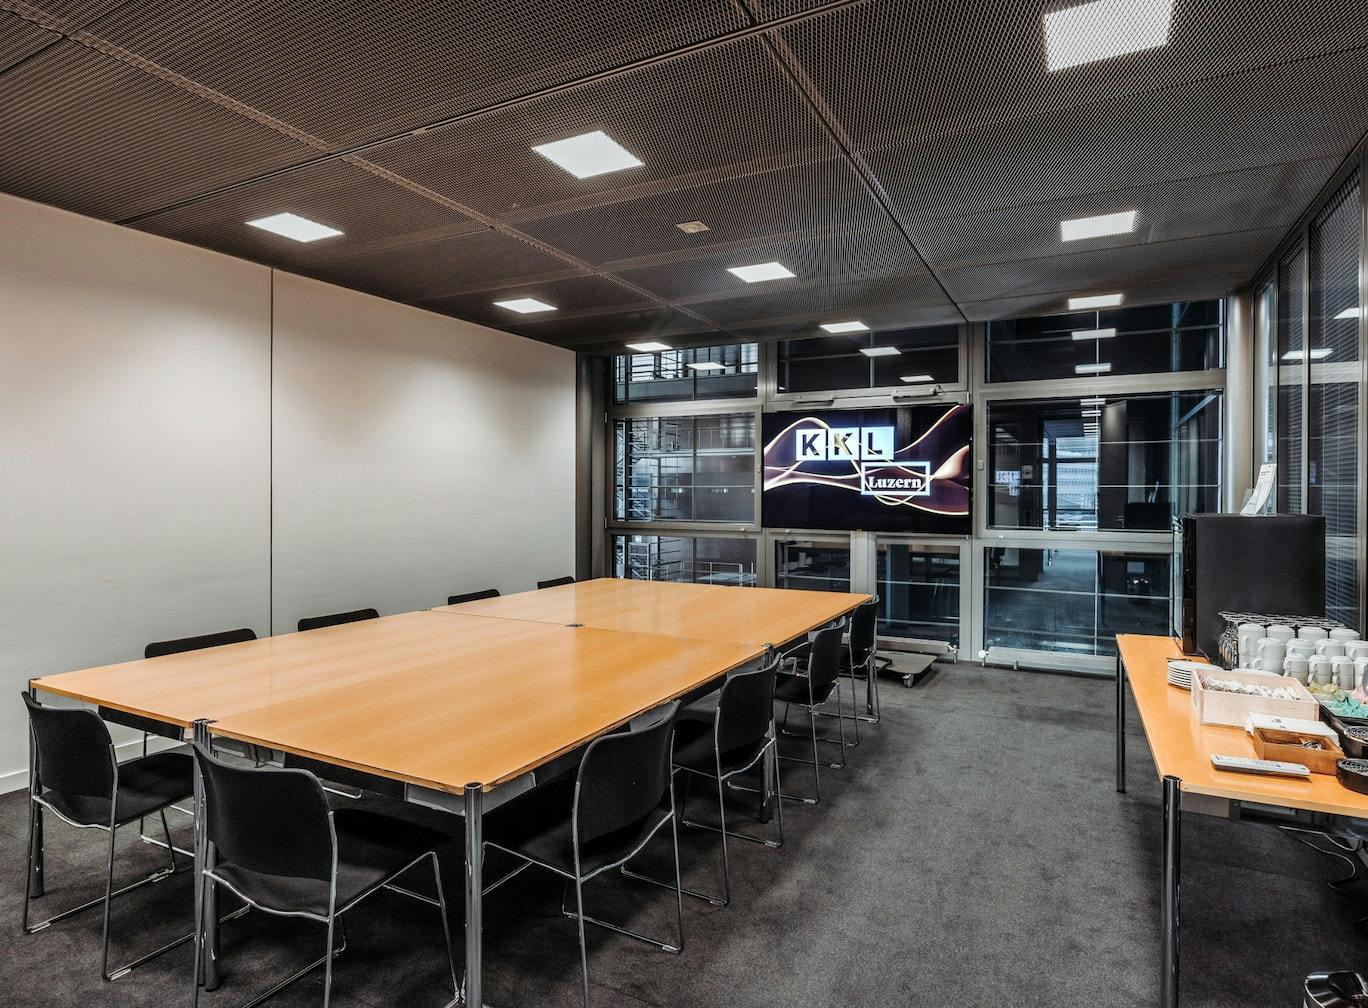 Business- and Media Room 2 in KKL Luzern with block table seating